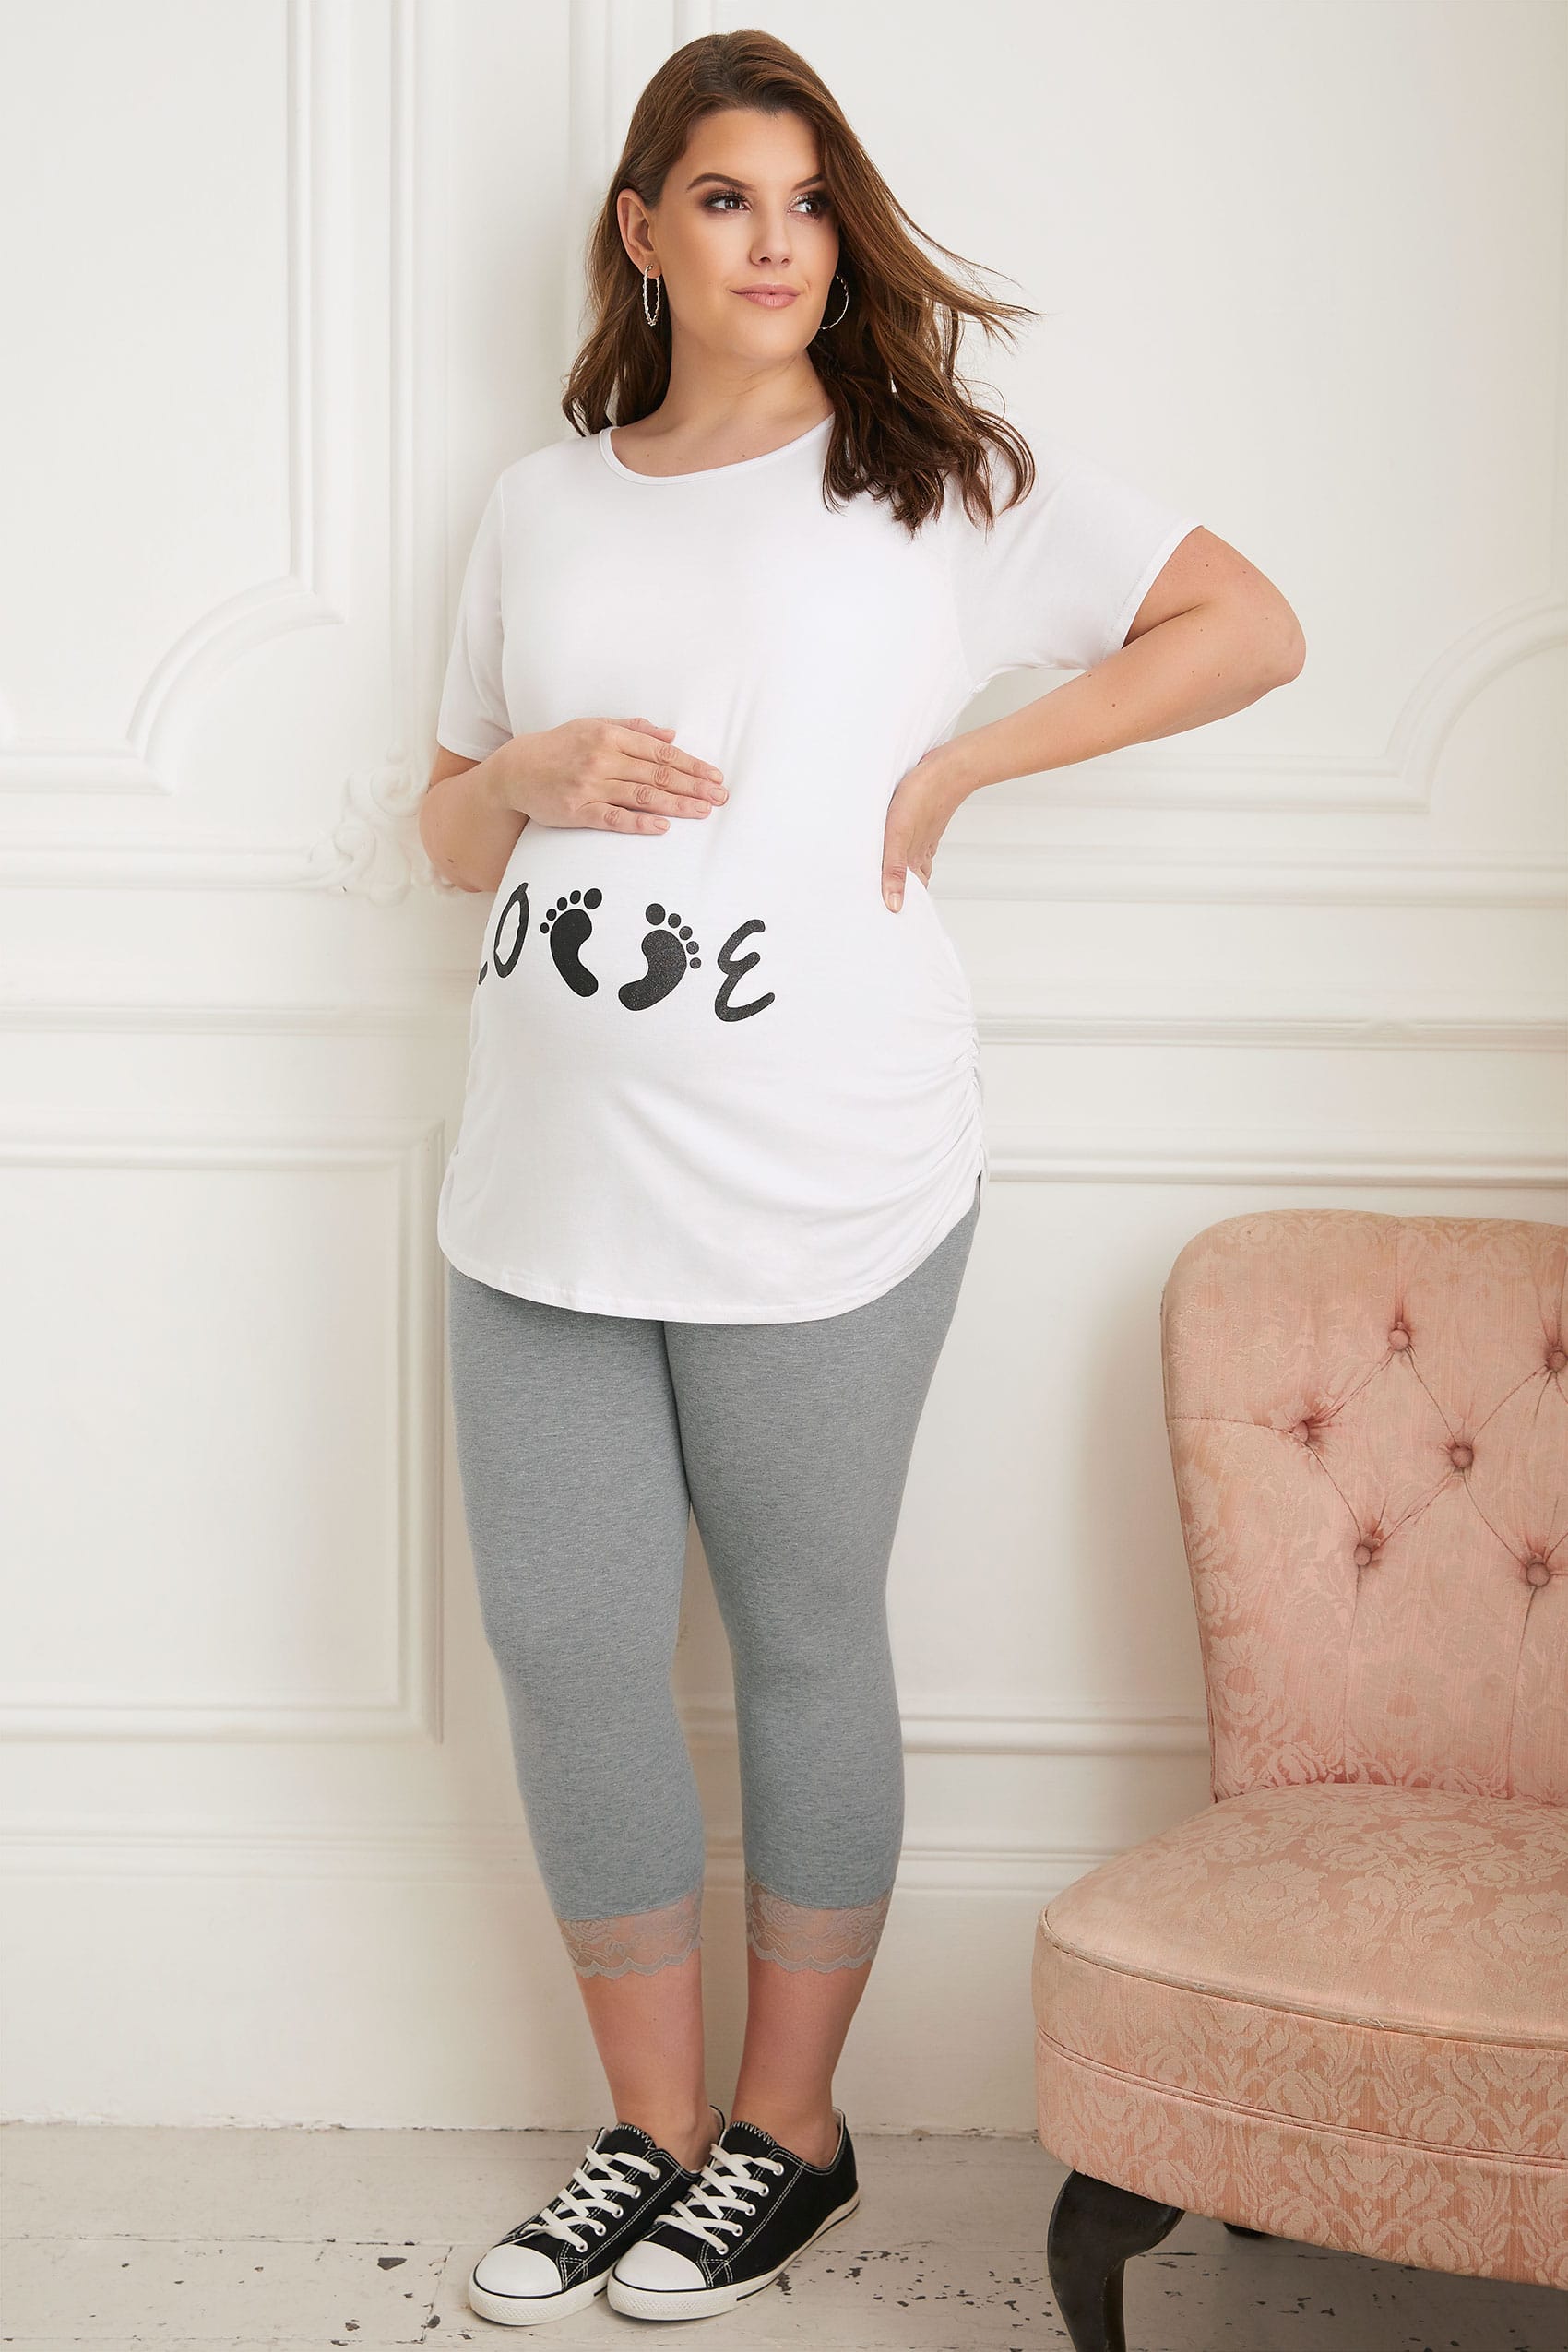 Maternity Clothes With Leggings